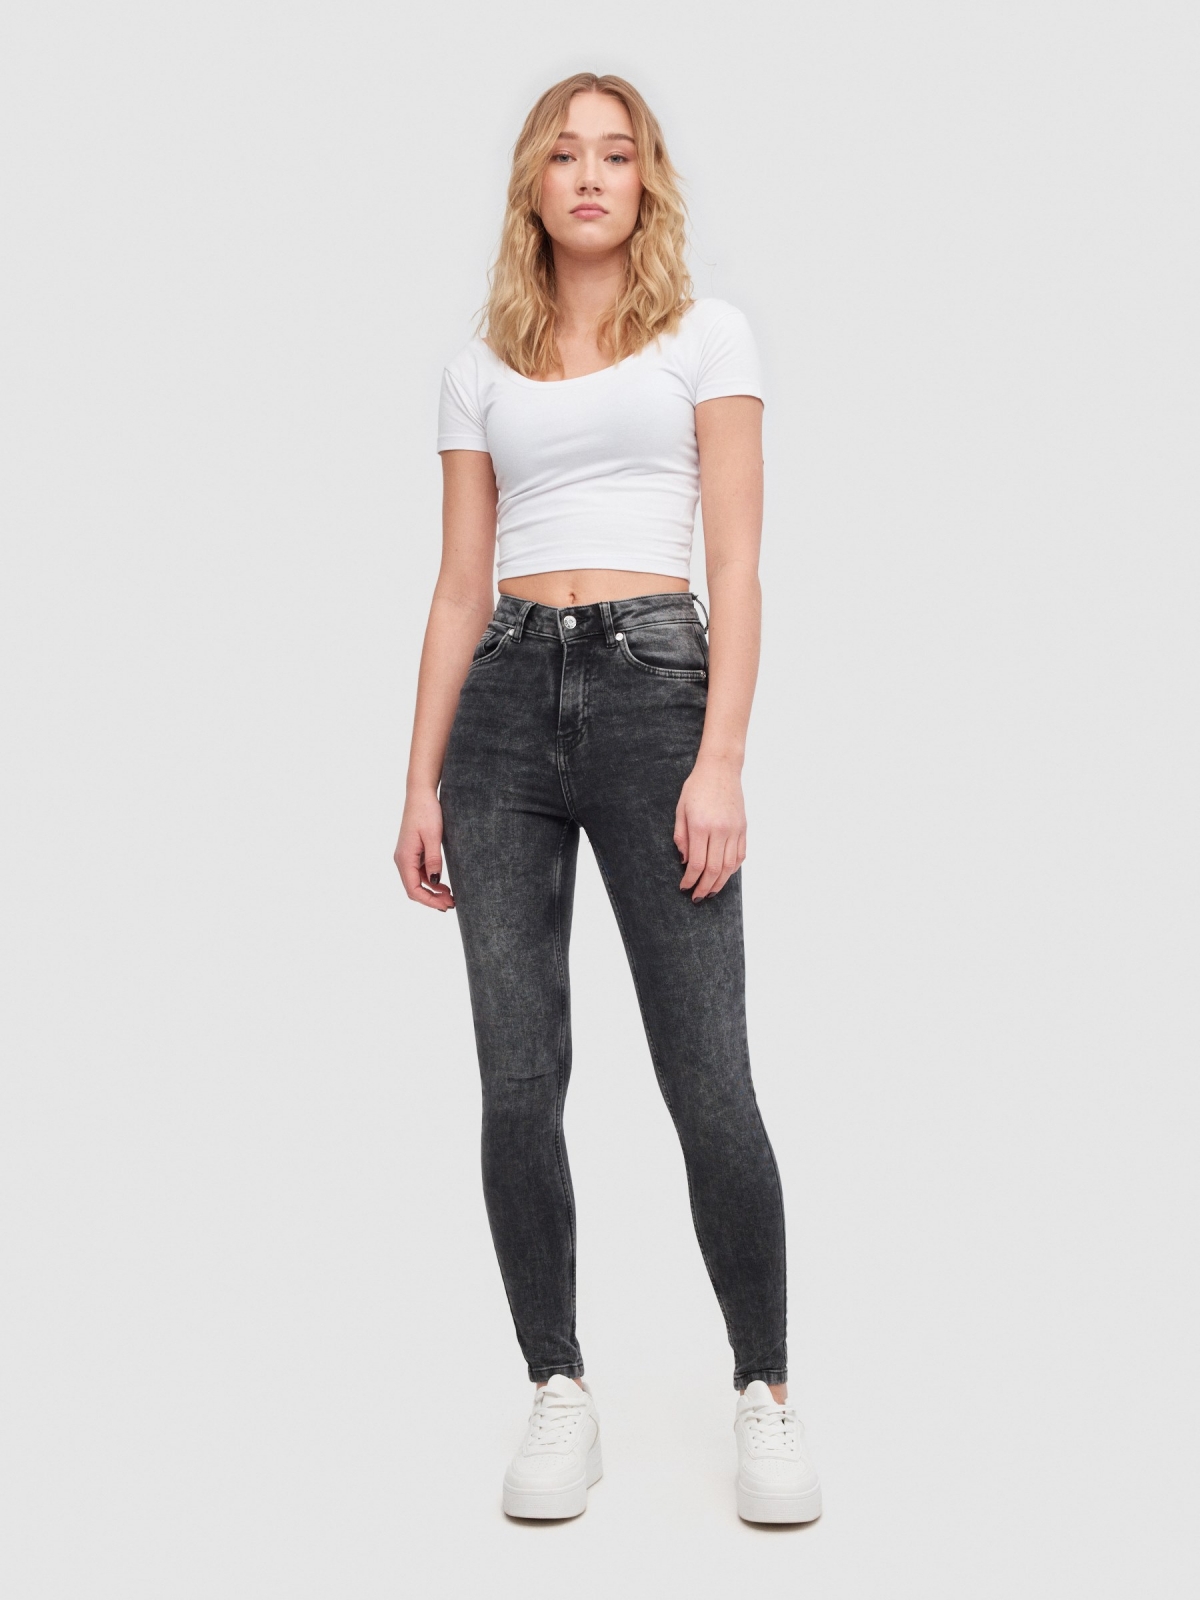 Skinny jeans push up black front view